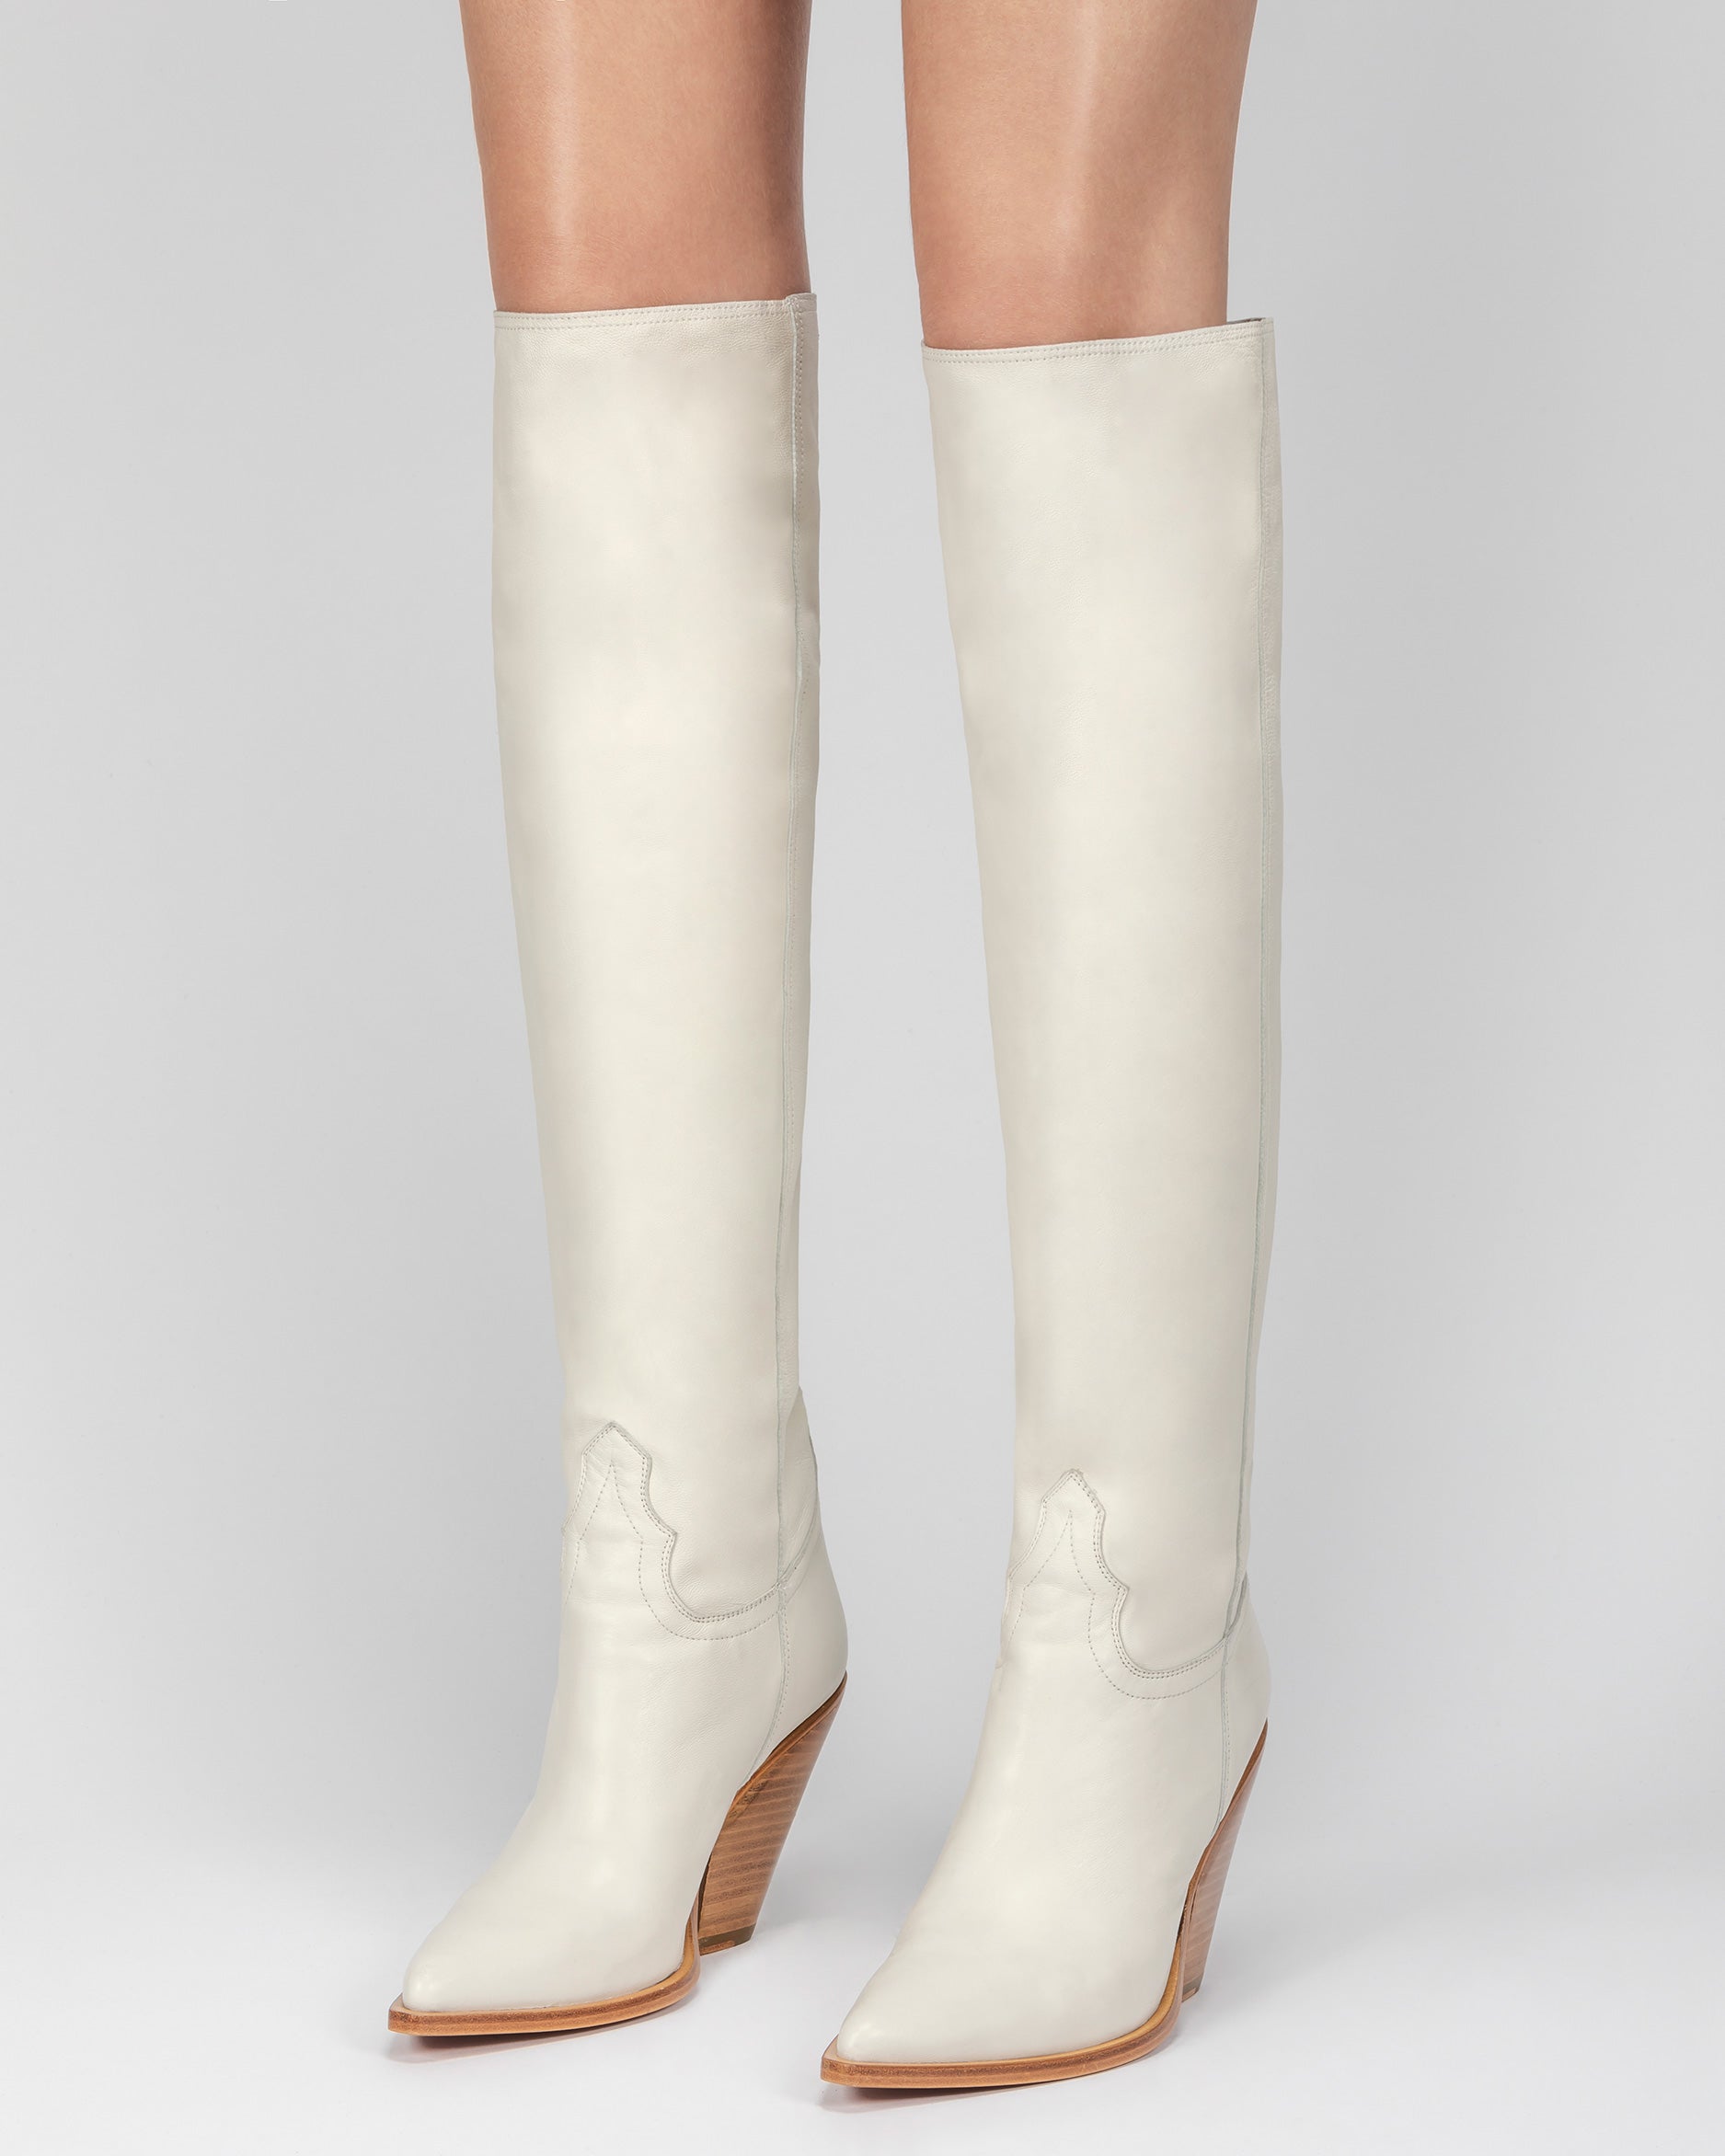 ACAPULCO Women's Knee Boots in White Nappa